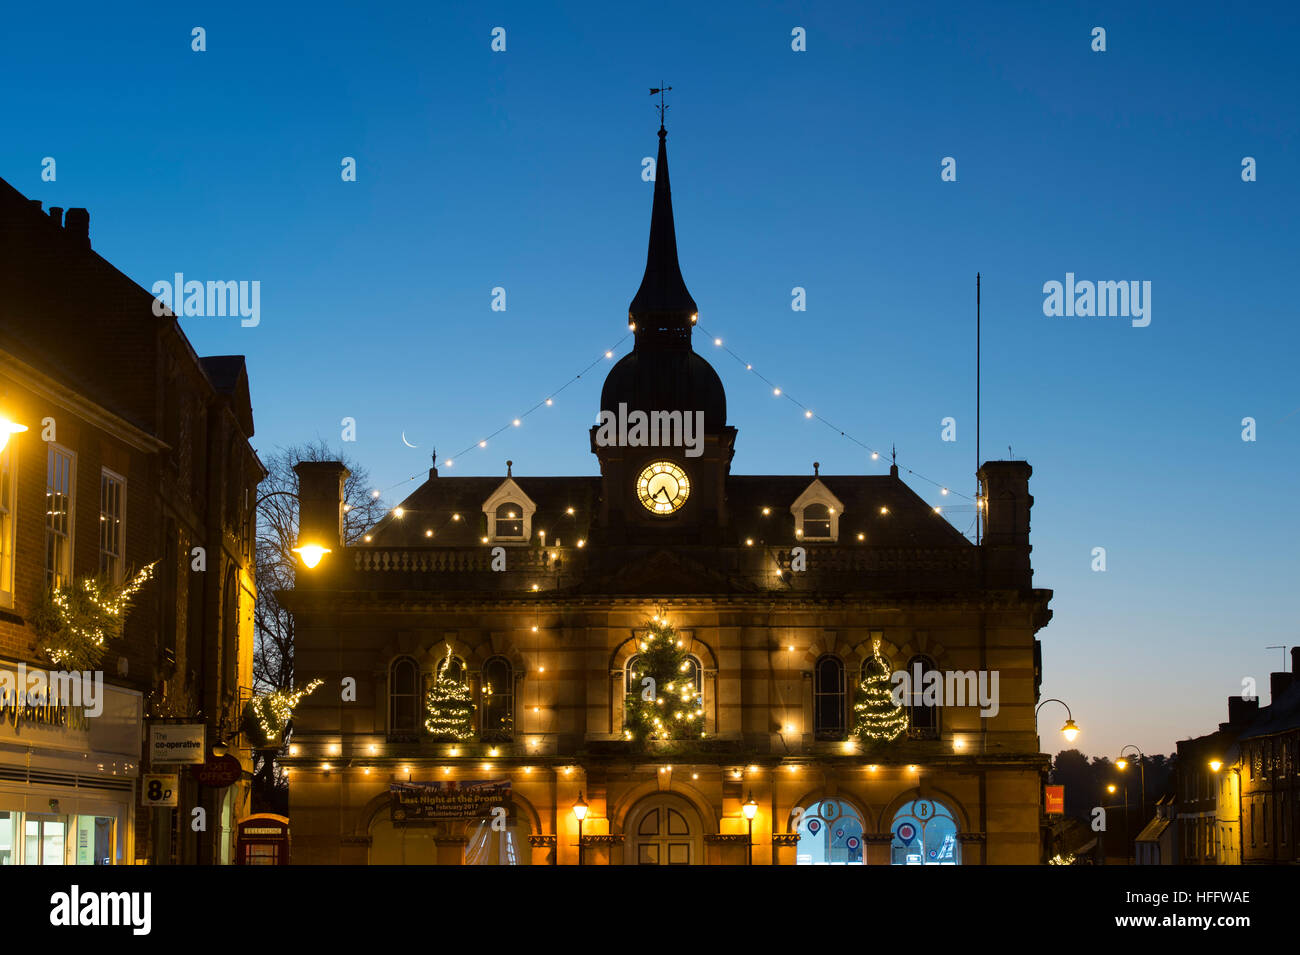 The Old Town Hall with Christmas lights before sunrise, Market Square, Towcester, Northamptonshire, England Stock Photo